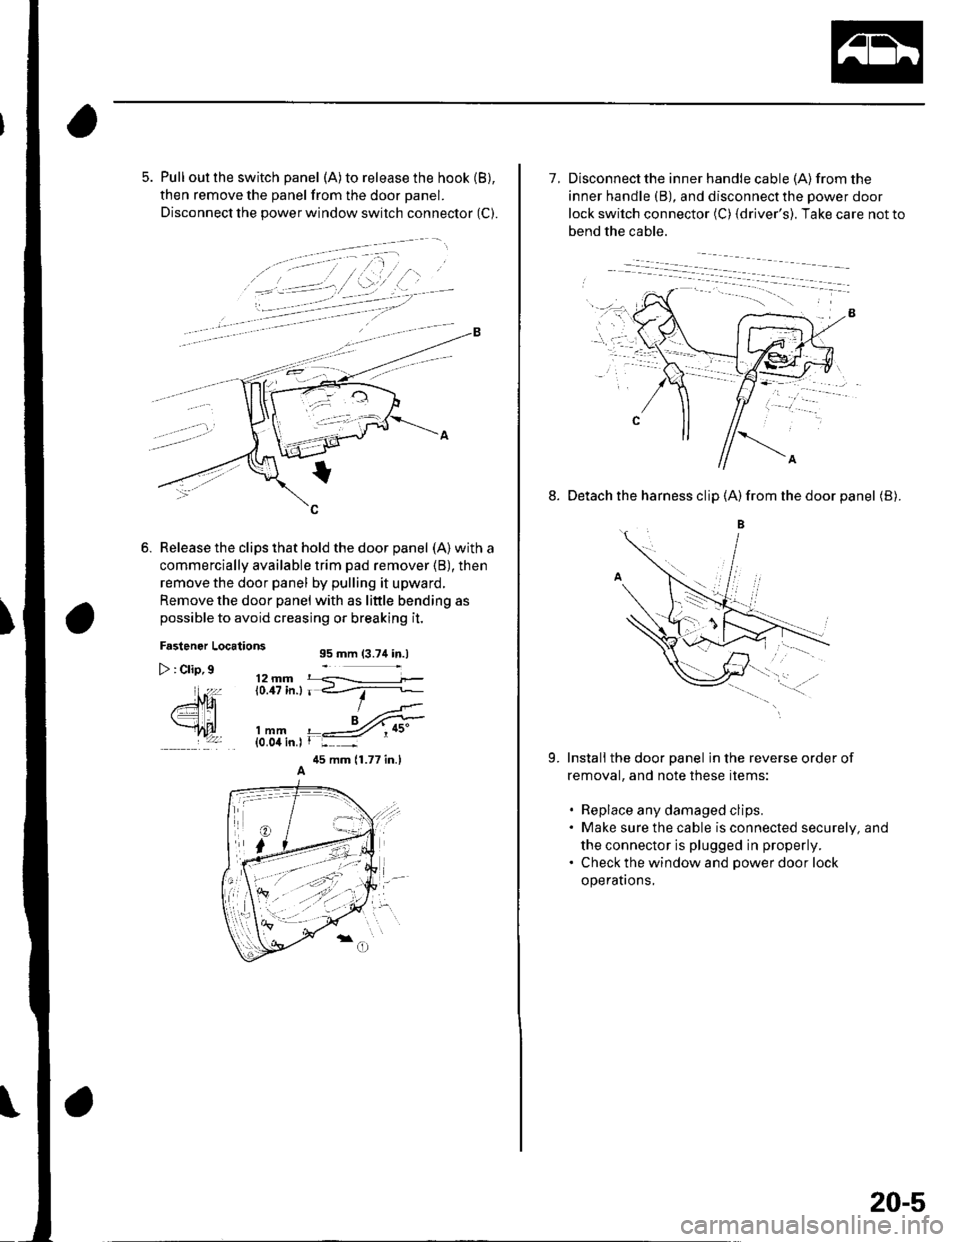 HONDA CIVIC 2003 7.G Workshop Manual 5. Pull out the switch panel (A)to release the hook (B),
then remove the panel from the door panel.
Disconnect the power window switch connector (C).
Release the clips that hold the door panel (A) wit